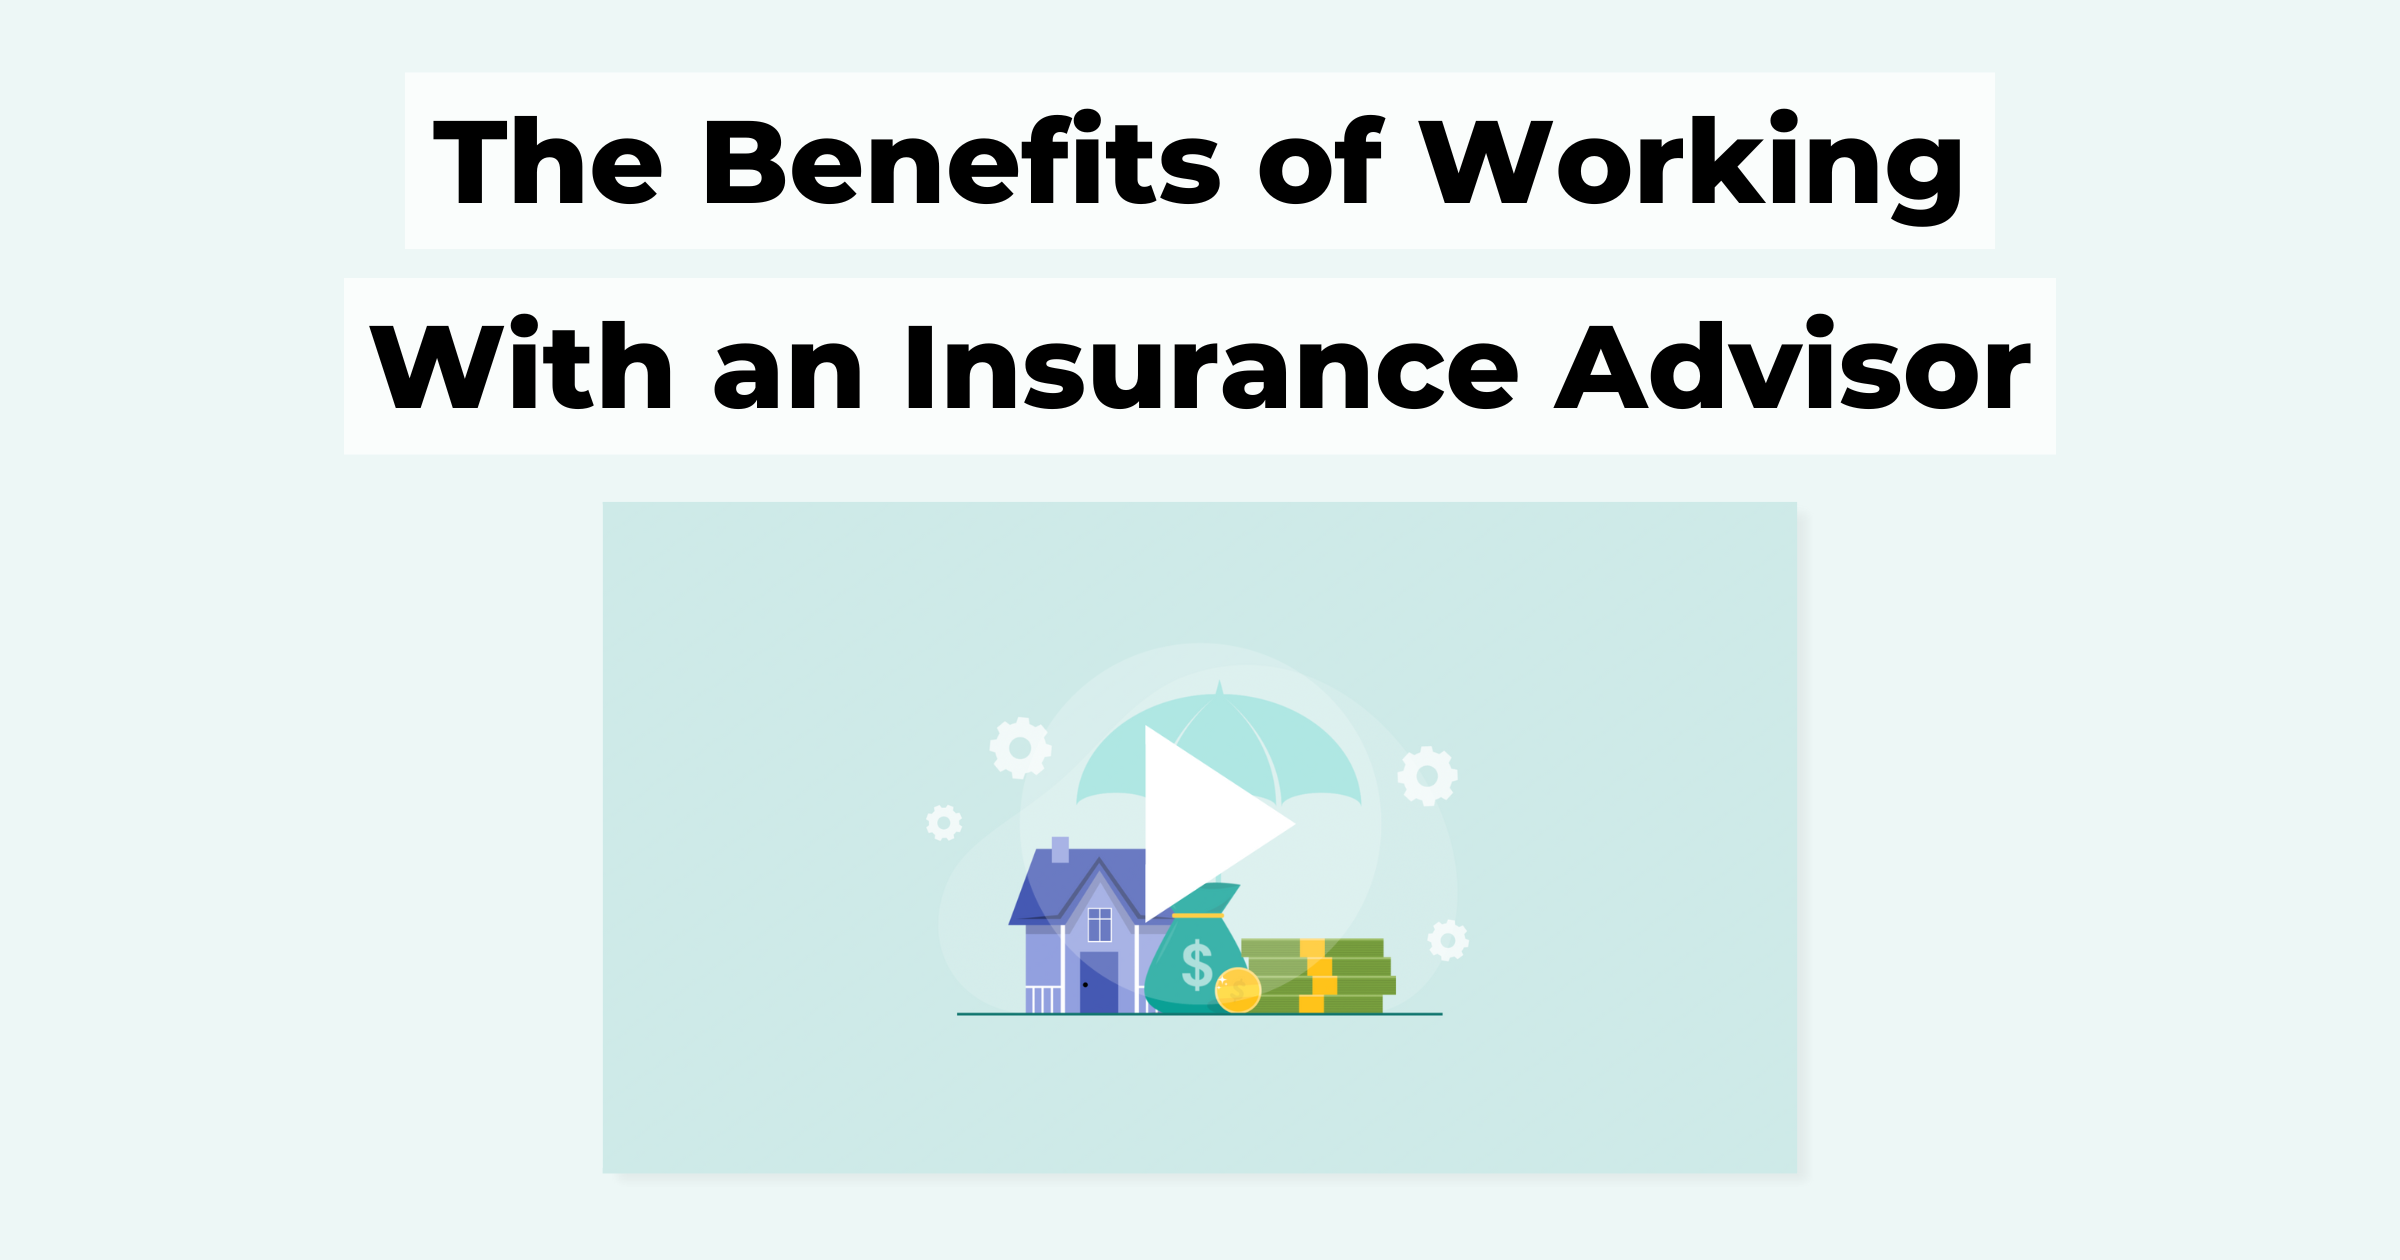 The Benefits of Working With an Insurance Advisor